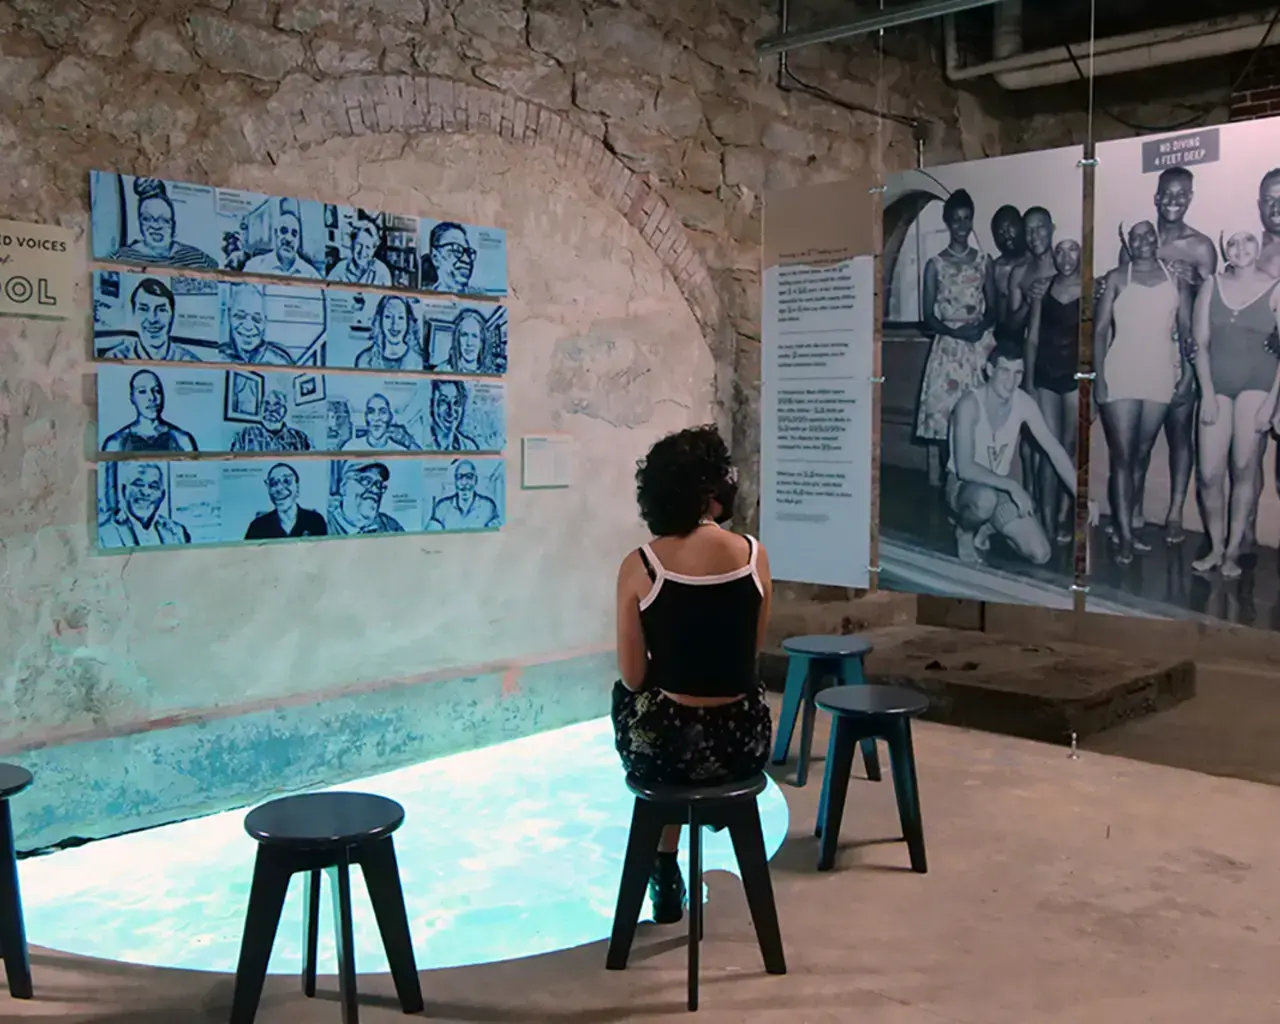 POOL: A Social History of Segregation, installation view, 2022, Fairmount Water Works. Photo by GreenTreks, courtesy of the Fairmount Water Works Interpretive Center.